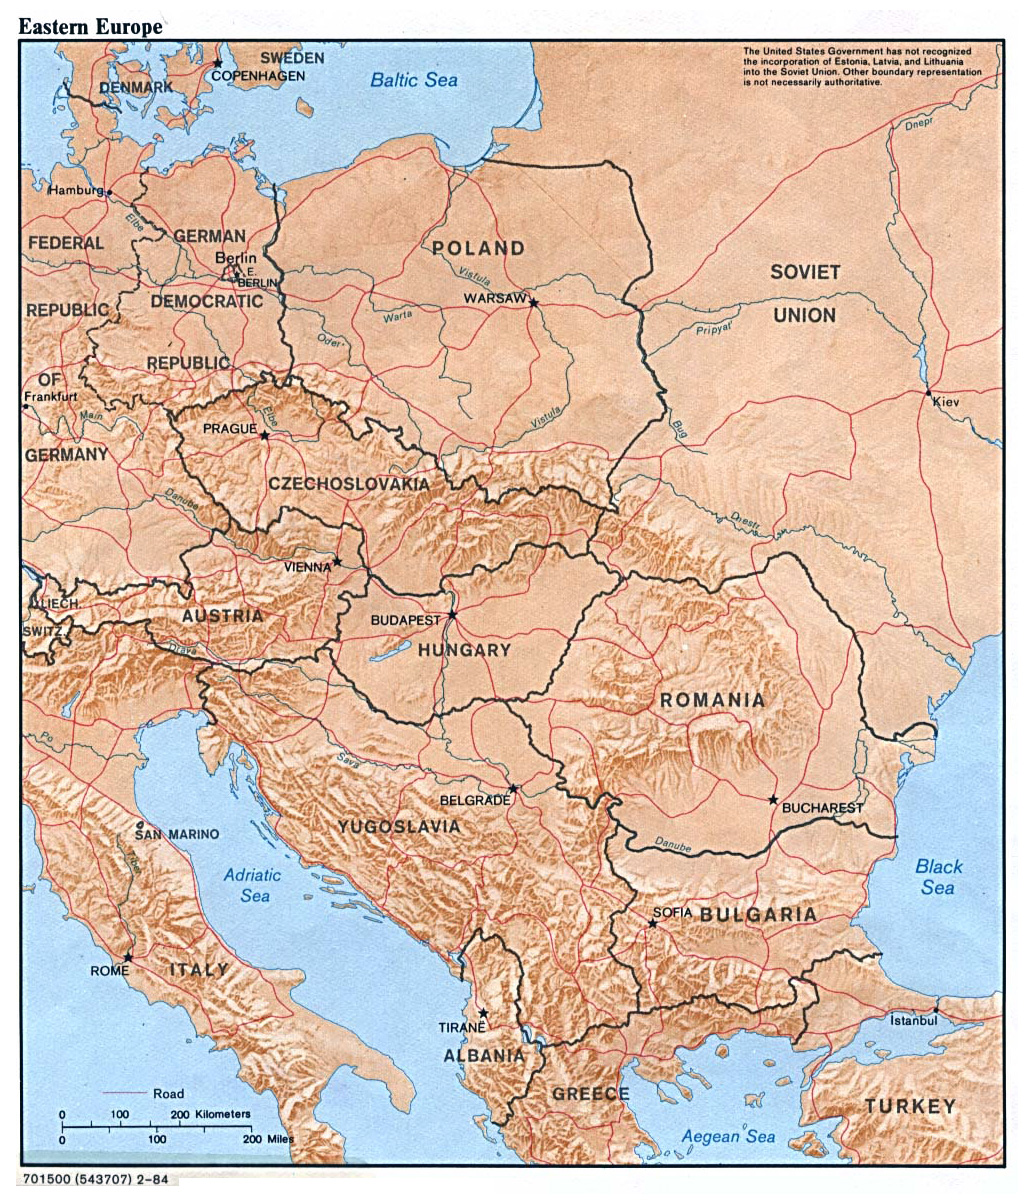 Map of Eastern Europe with Major Cities